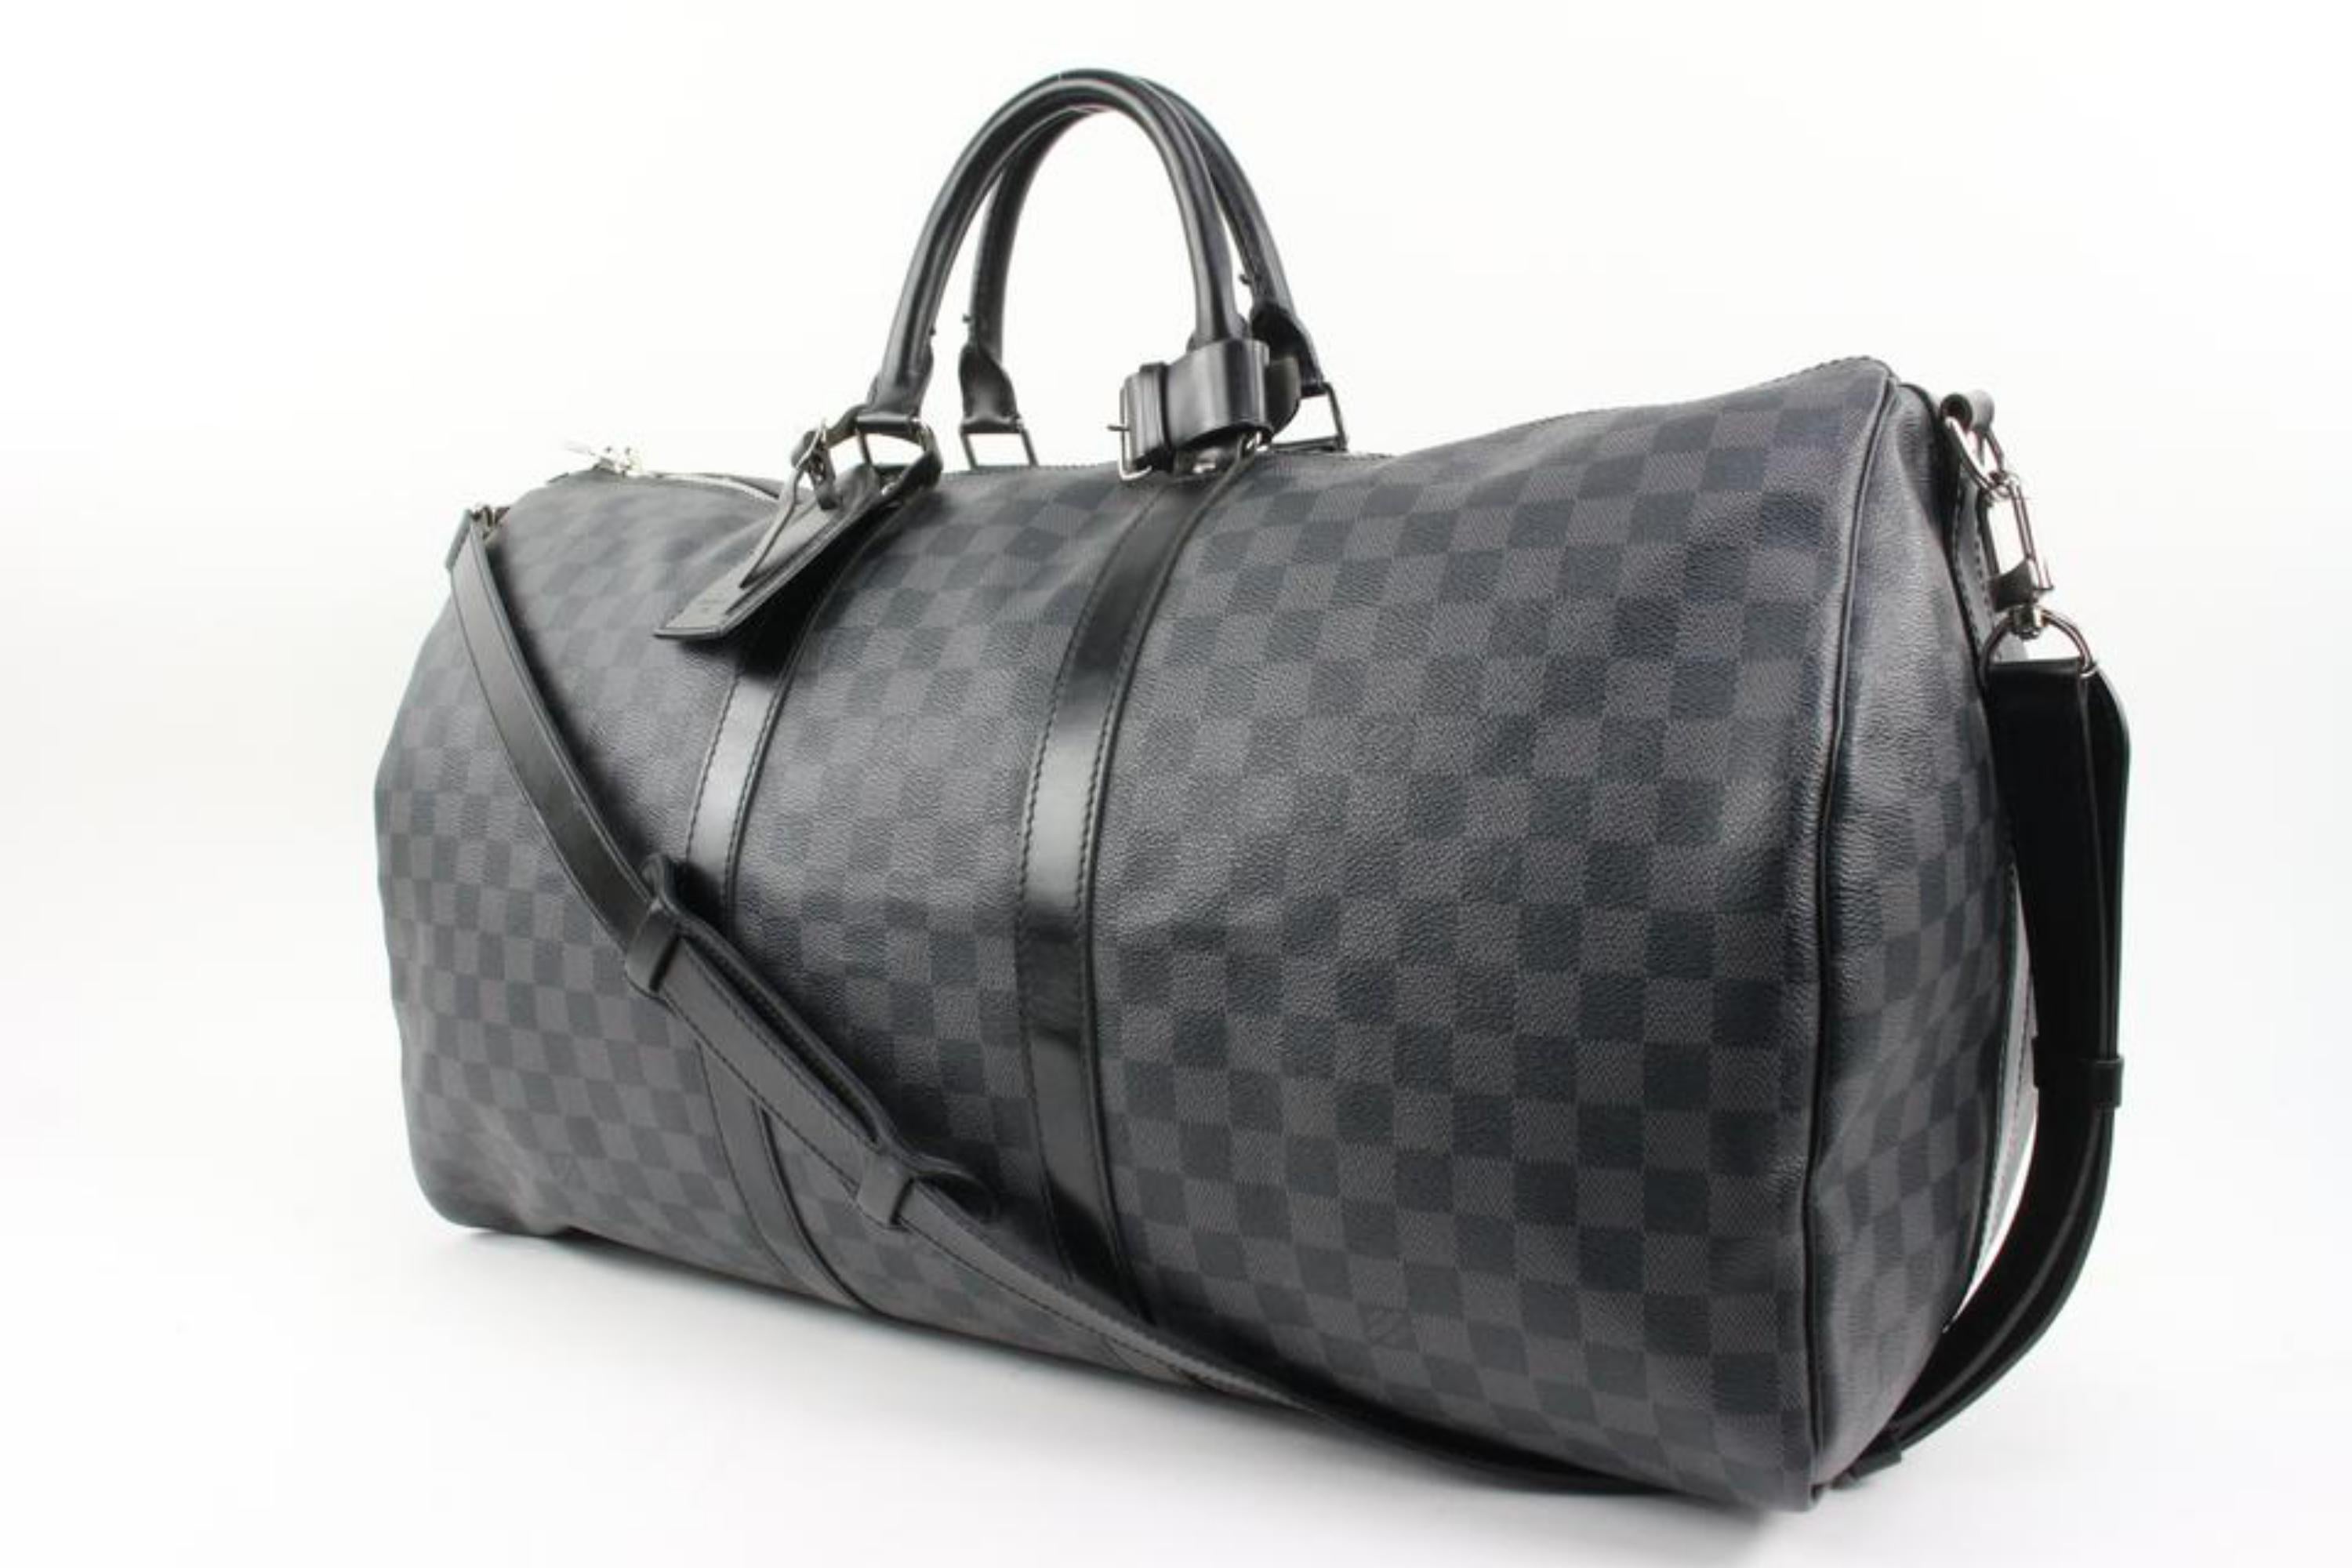 Louis Vuitton Damier Graphite Keepall Bandouliere 55 Duffle with Strap 97lv221s
Date Code/Serial Number: MB5028
Made In: France
Measurements: Length:  21.5